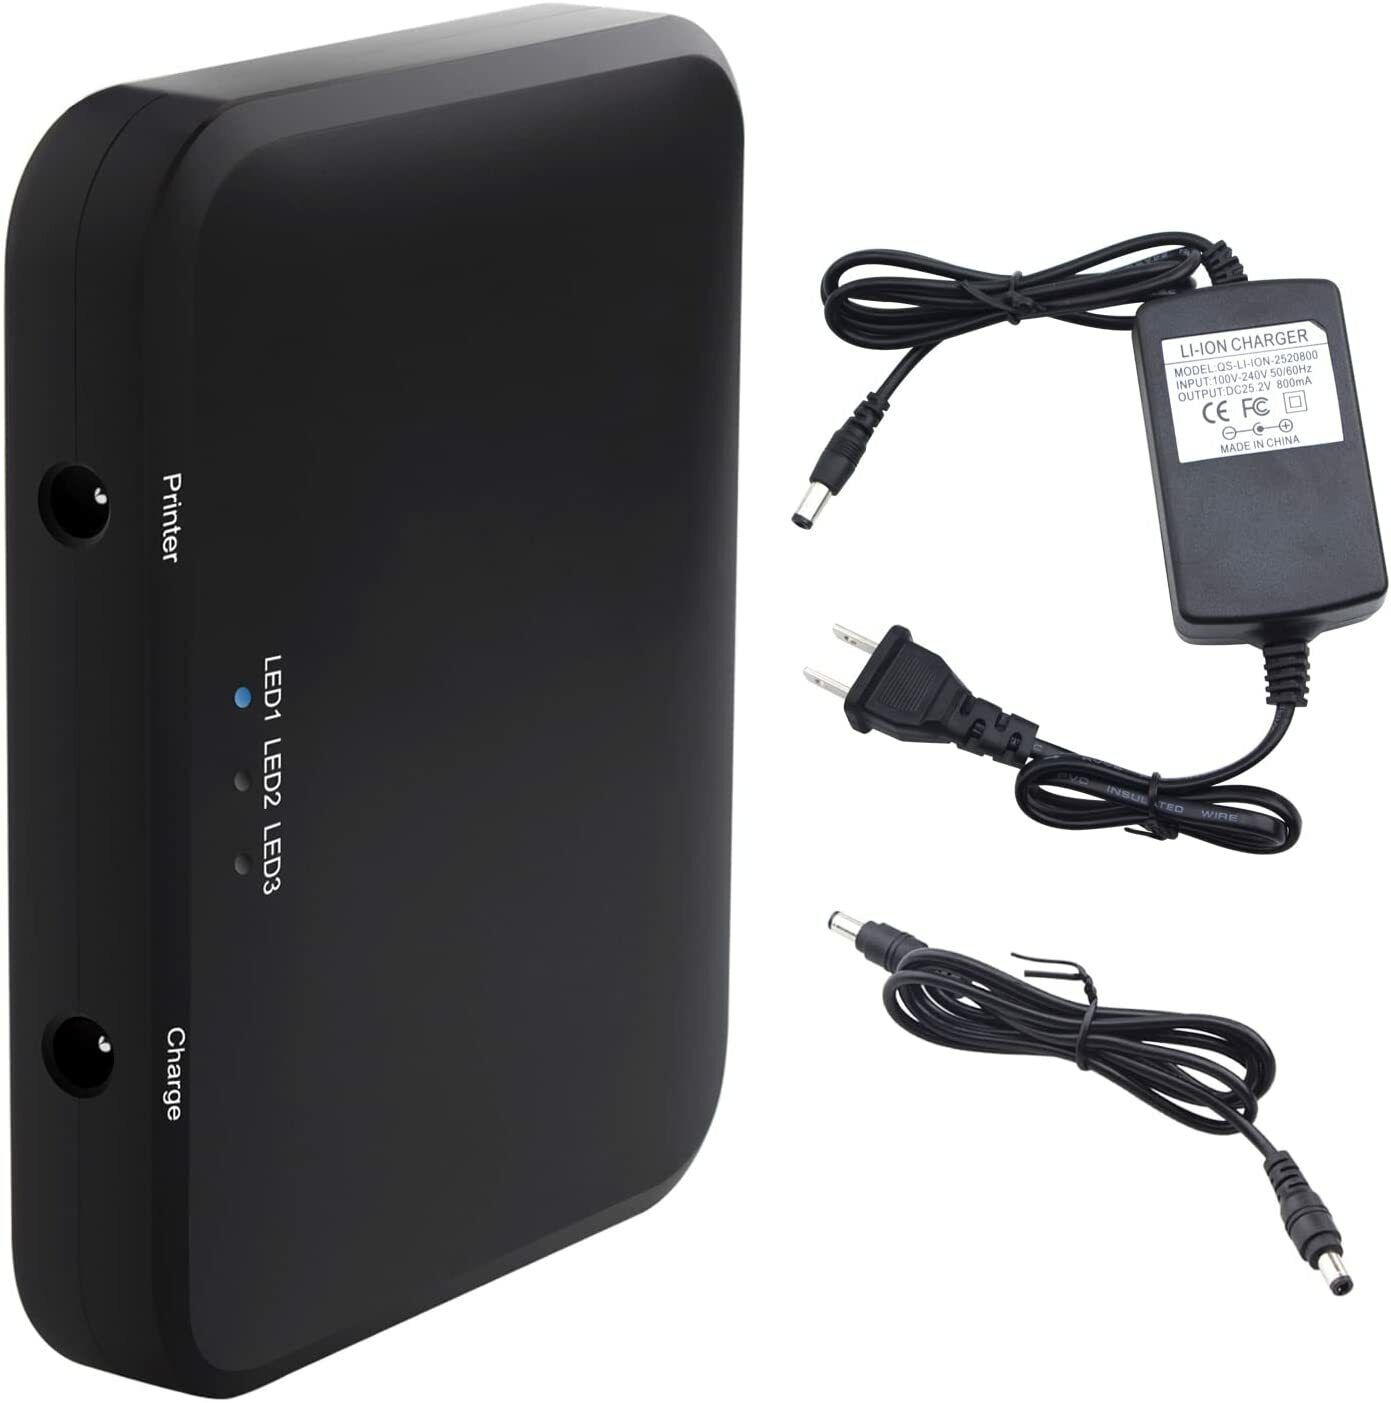 Backup Lithium Battery Pack for Canon Selphy Photo Printer Power Bank & Charger